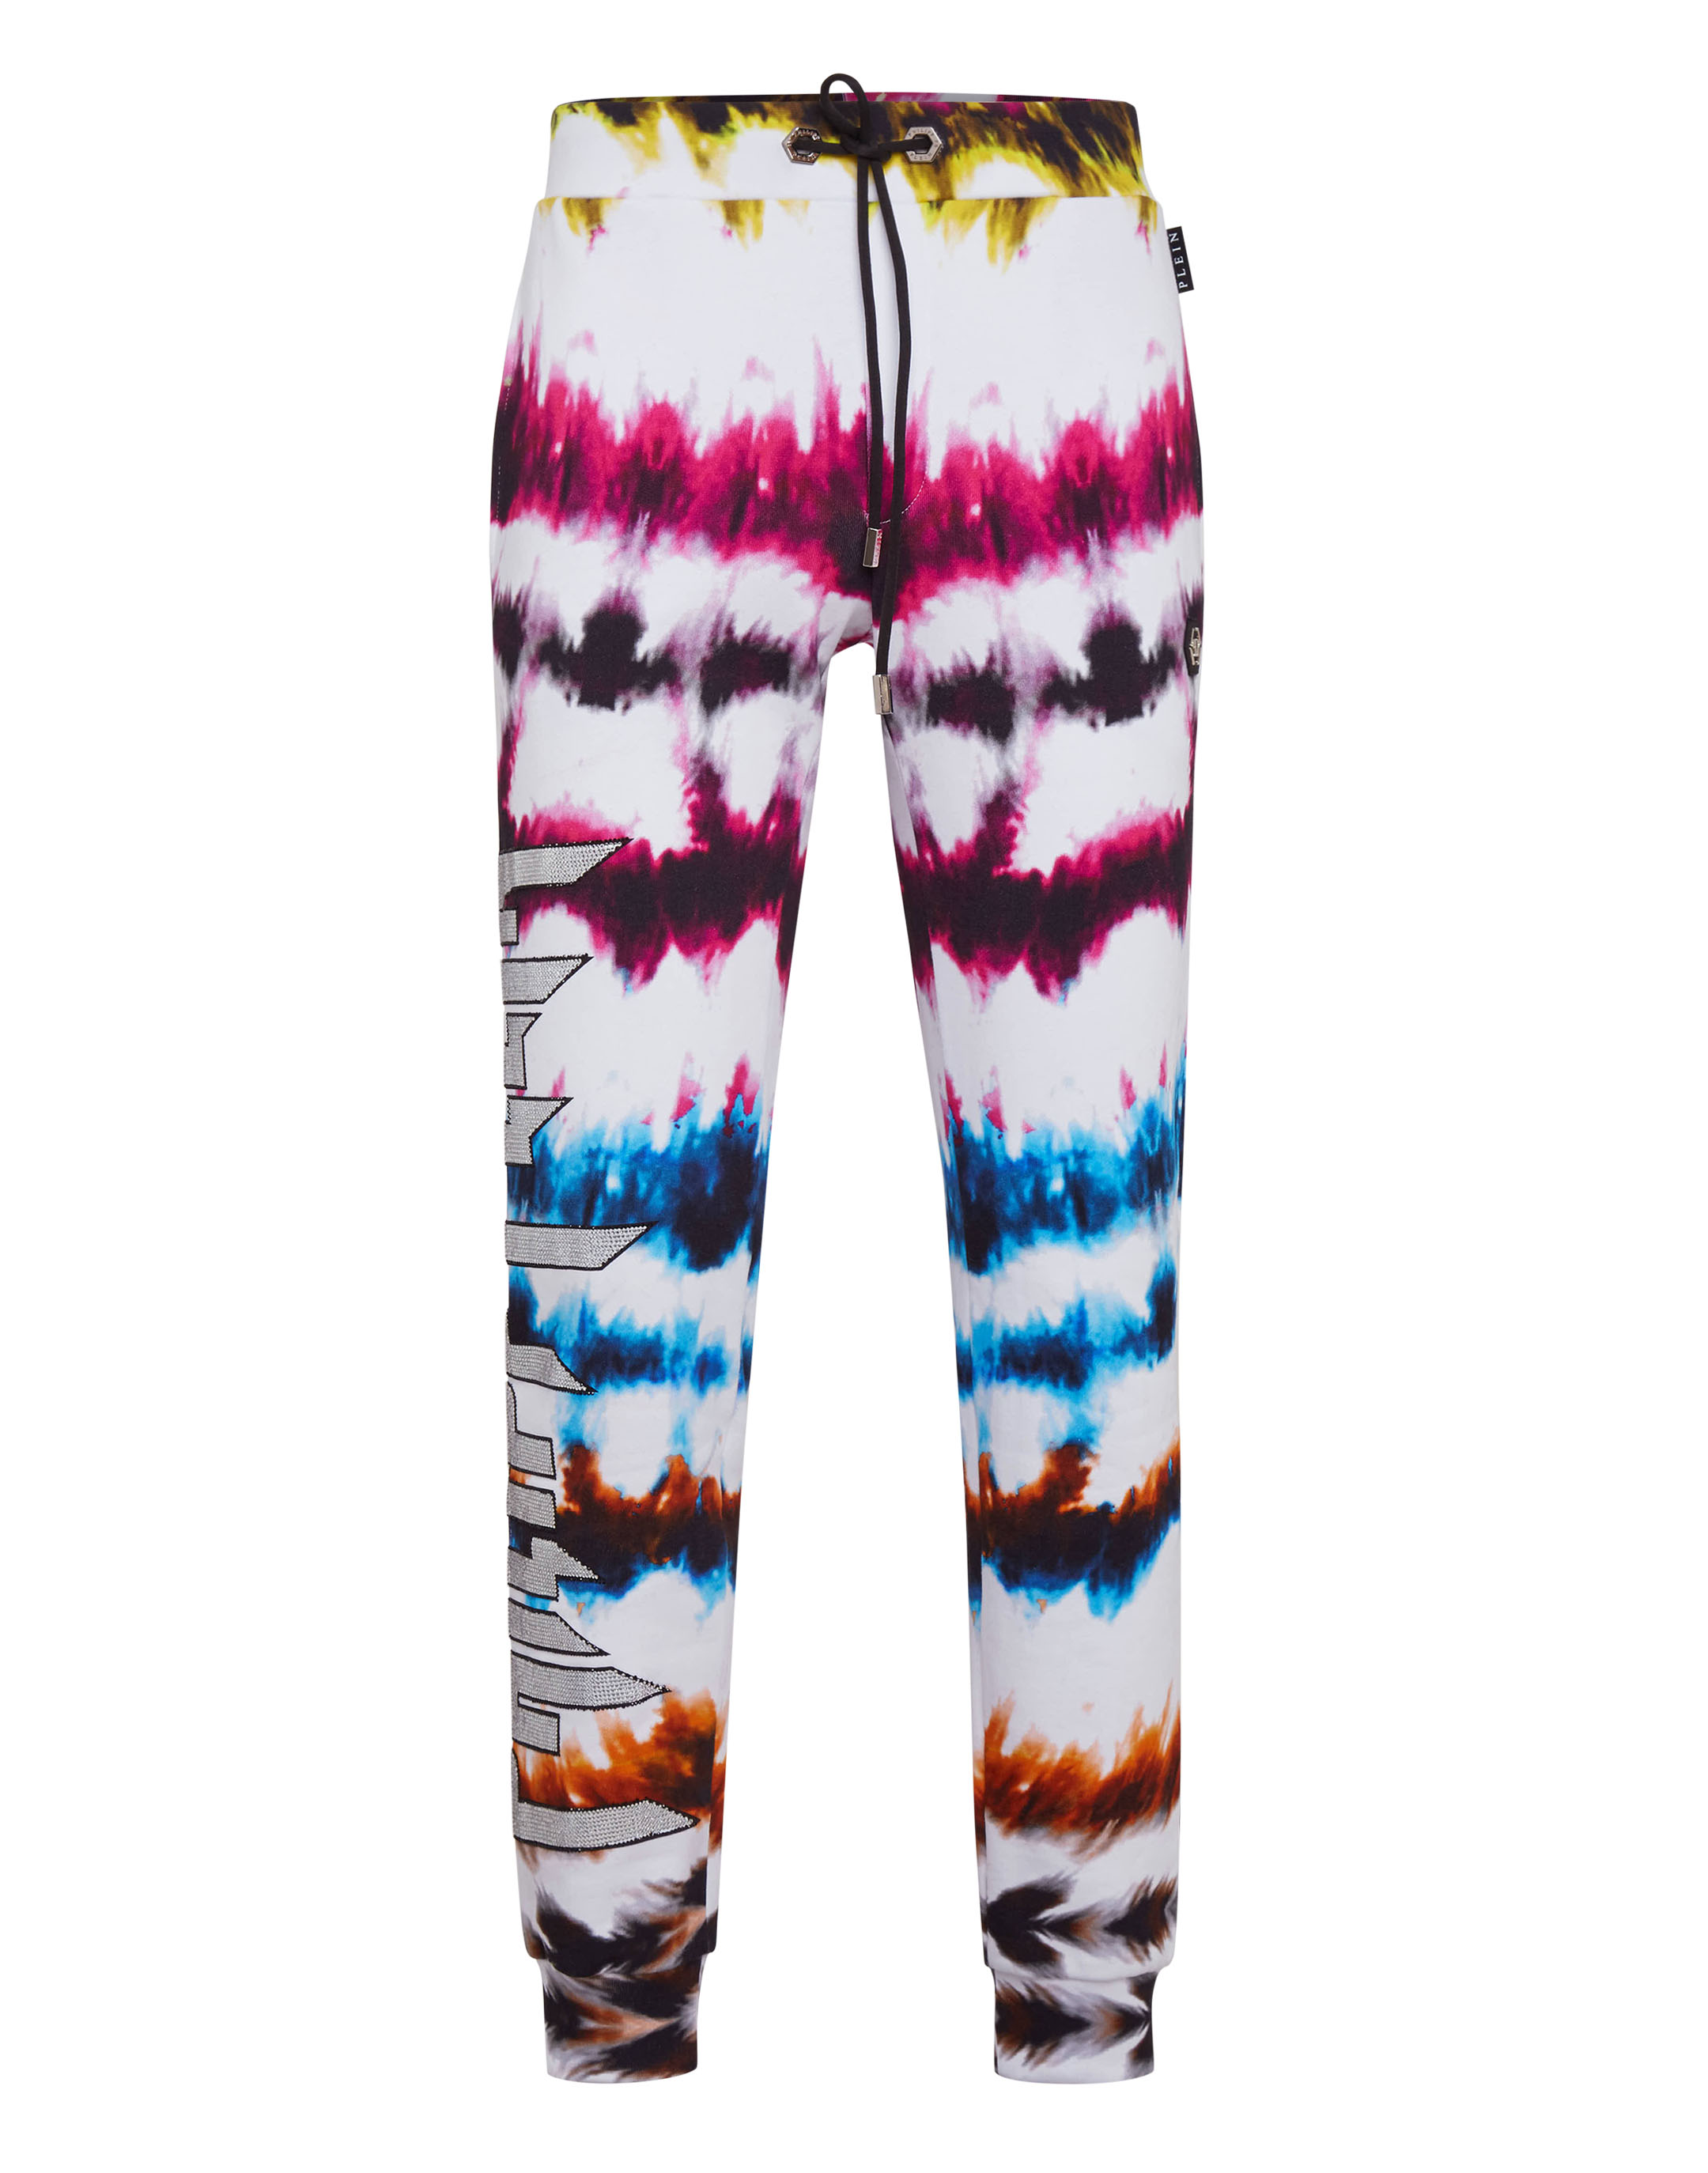 Tie Dye Trousers – The Hippy Clothing Co.